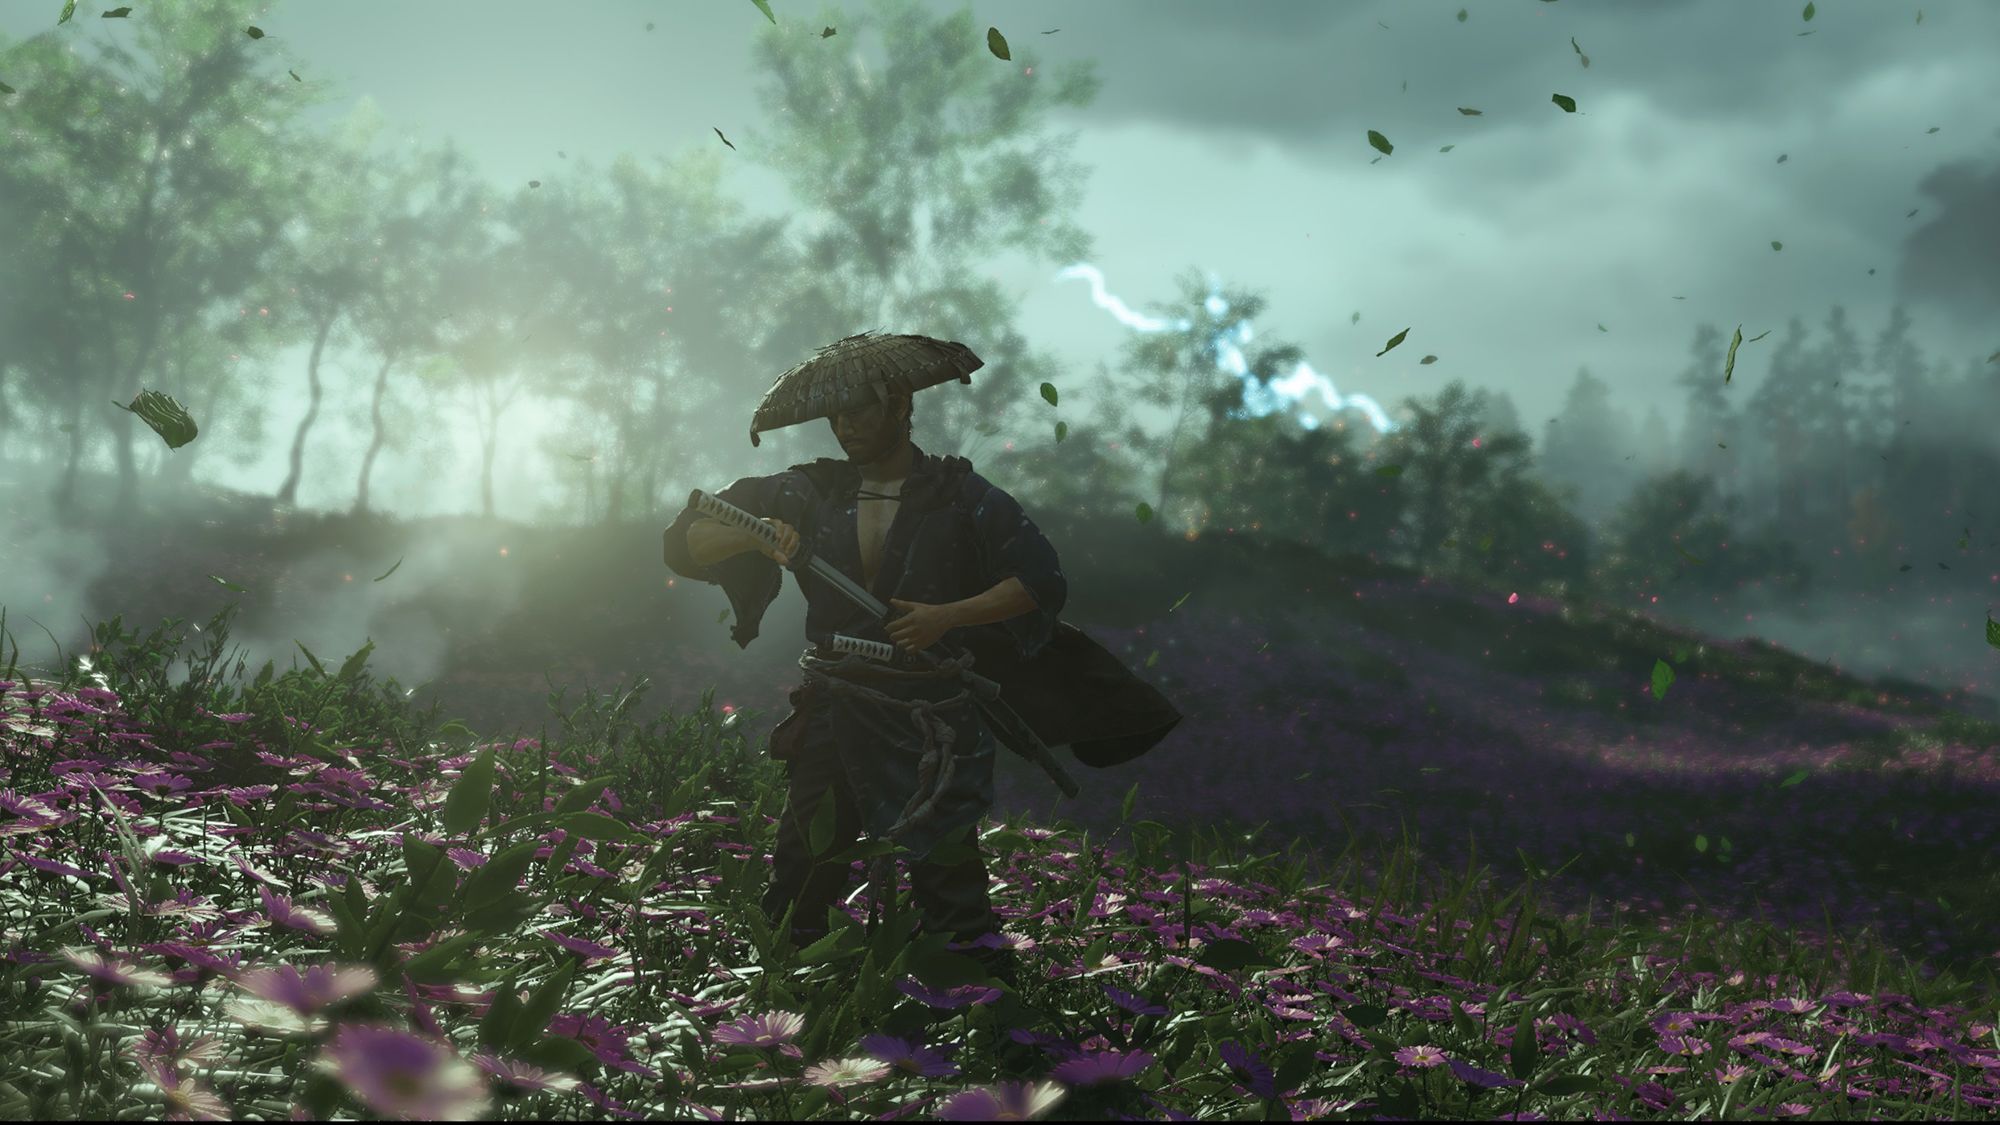 GHOST OF TSUSHIMA COMING TO PC😱😱 ON FEBRUARY 2022?? 